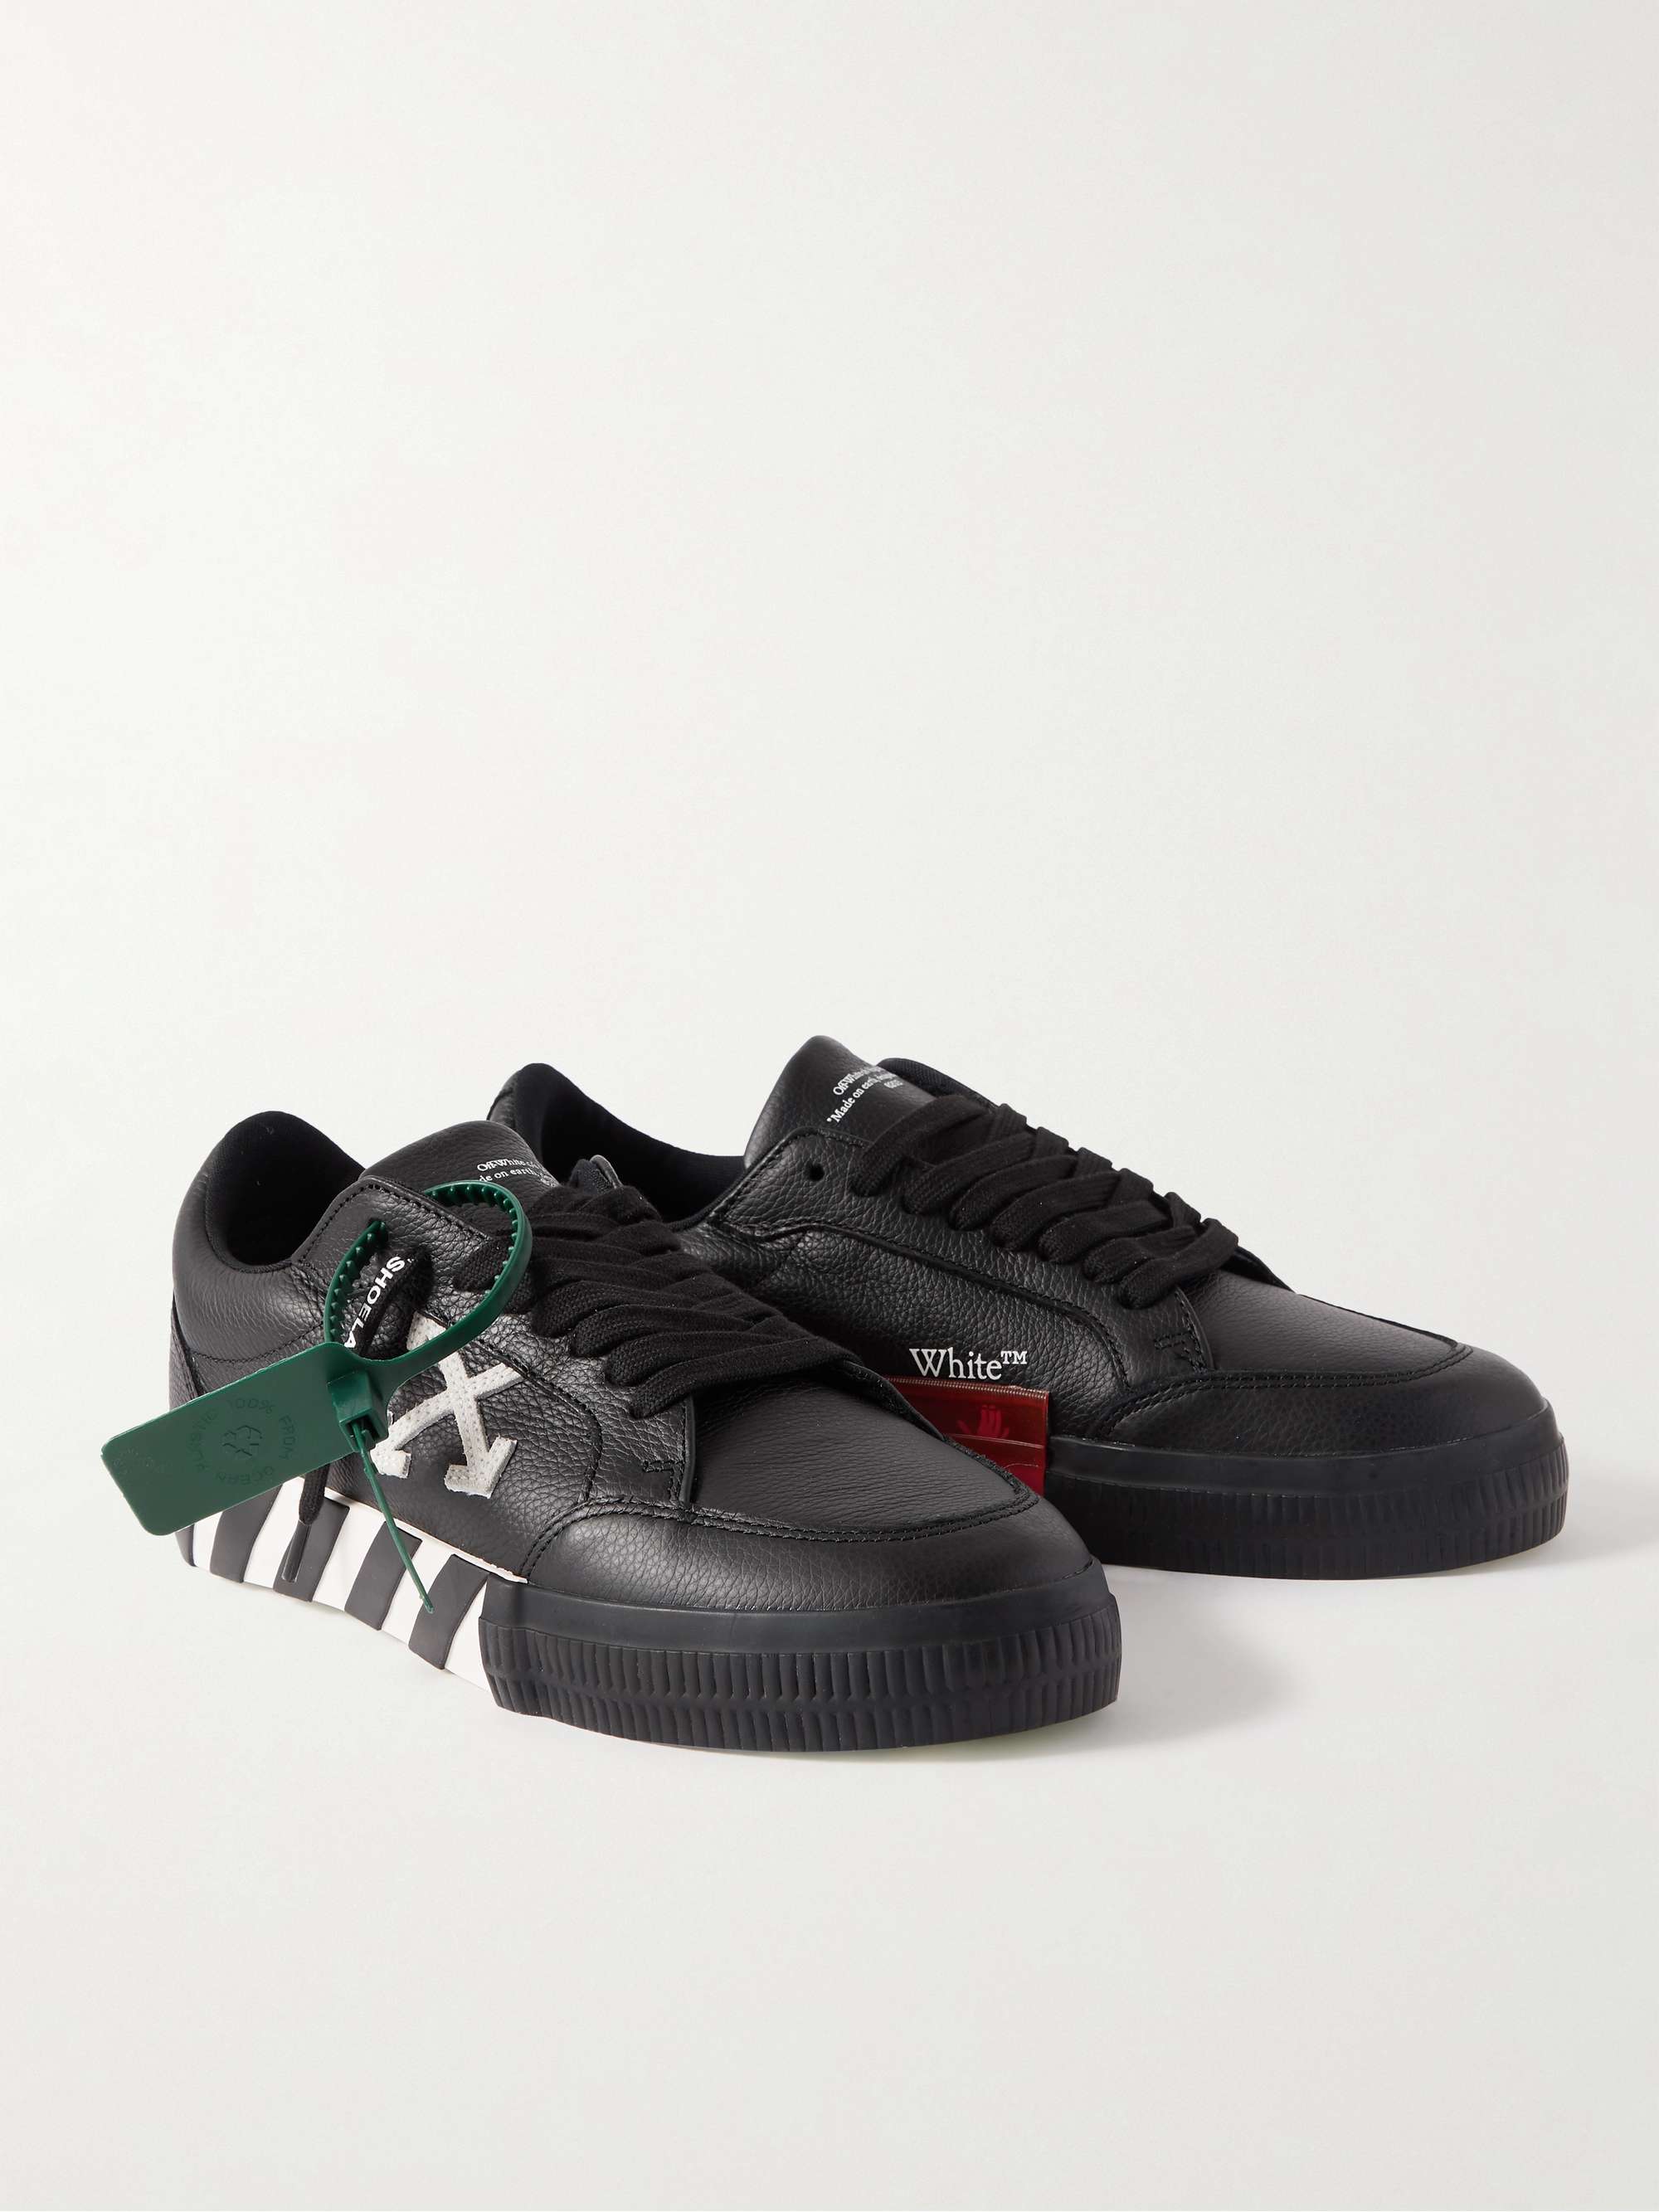 OFF-WHITE Full-Grain Leather Sneakers